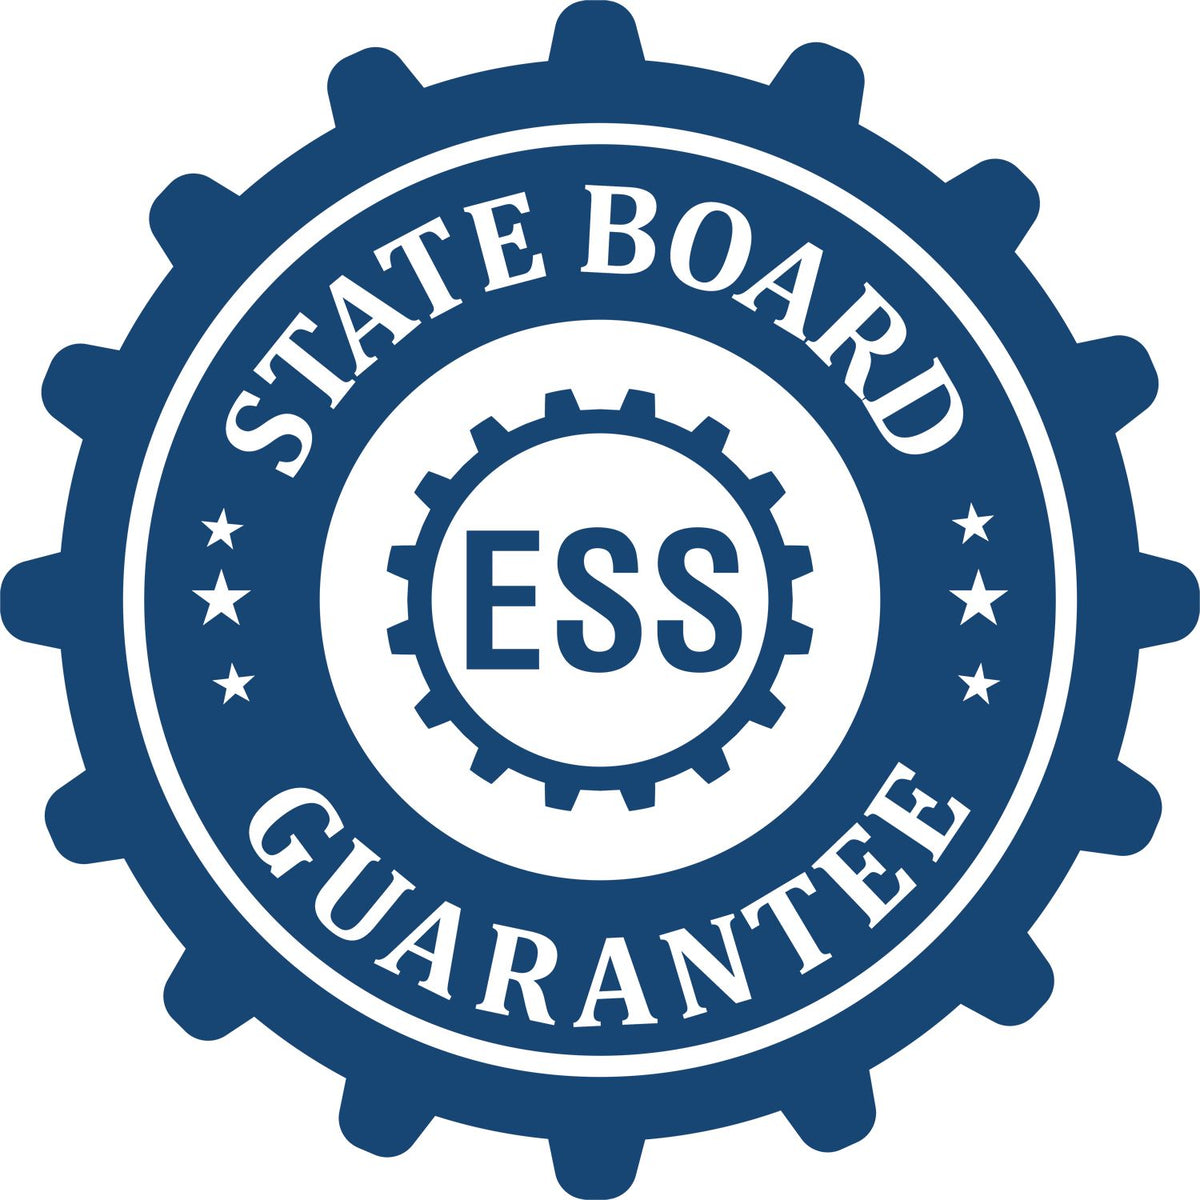 An emblem in a gear shape illustrating a state board guarantee for the Premium MaxLight Pre-Inked New Jersey Landscape Architectural Stamp product.